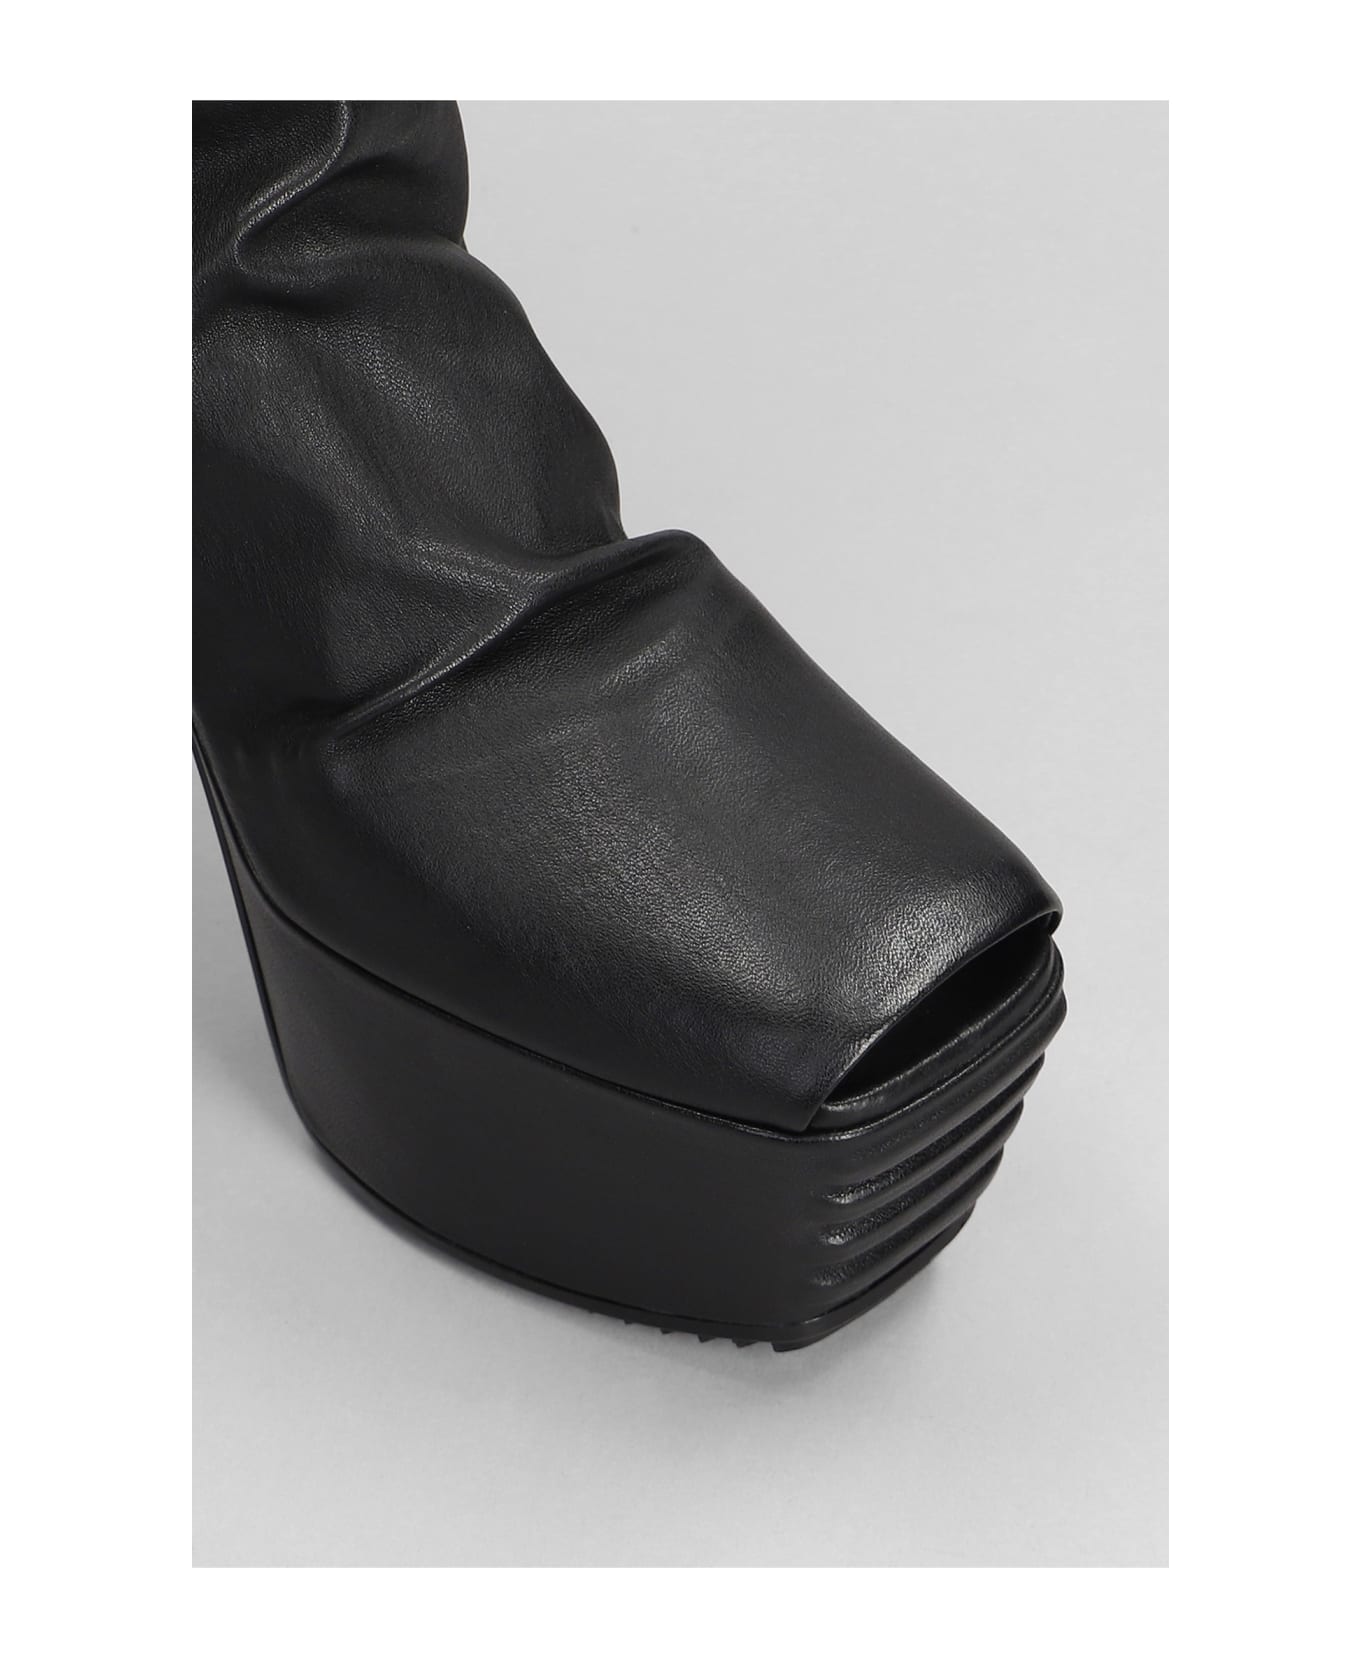 Rick Owens Minimal Gril Stretch High Heels Ankle Boots In Black Leather - black